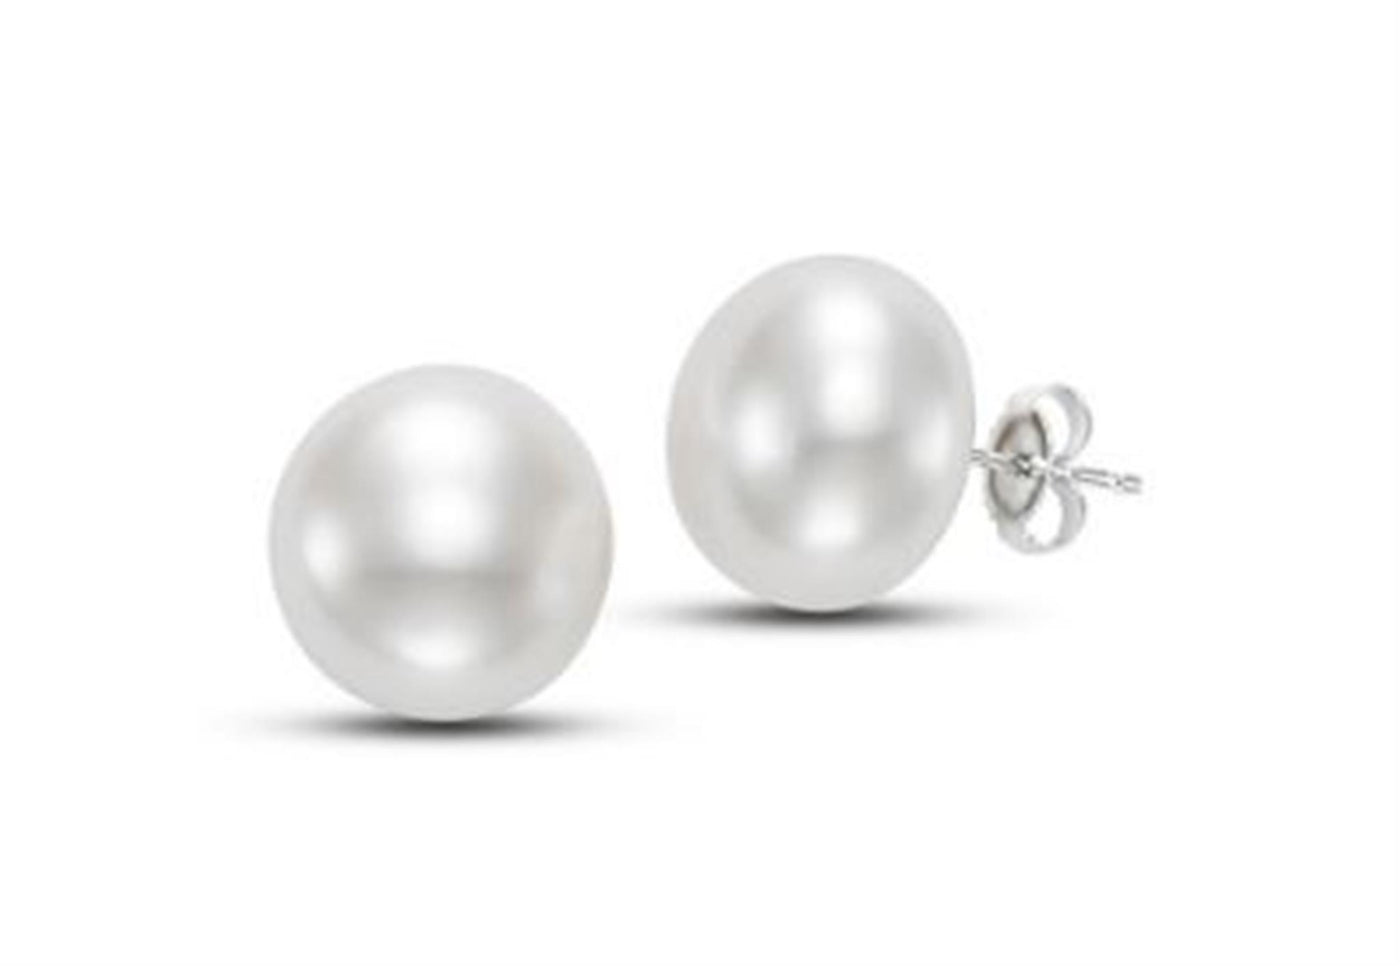 14K White Gold Stud Style Earrings Featuring White Freshwater Pearls